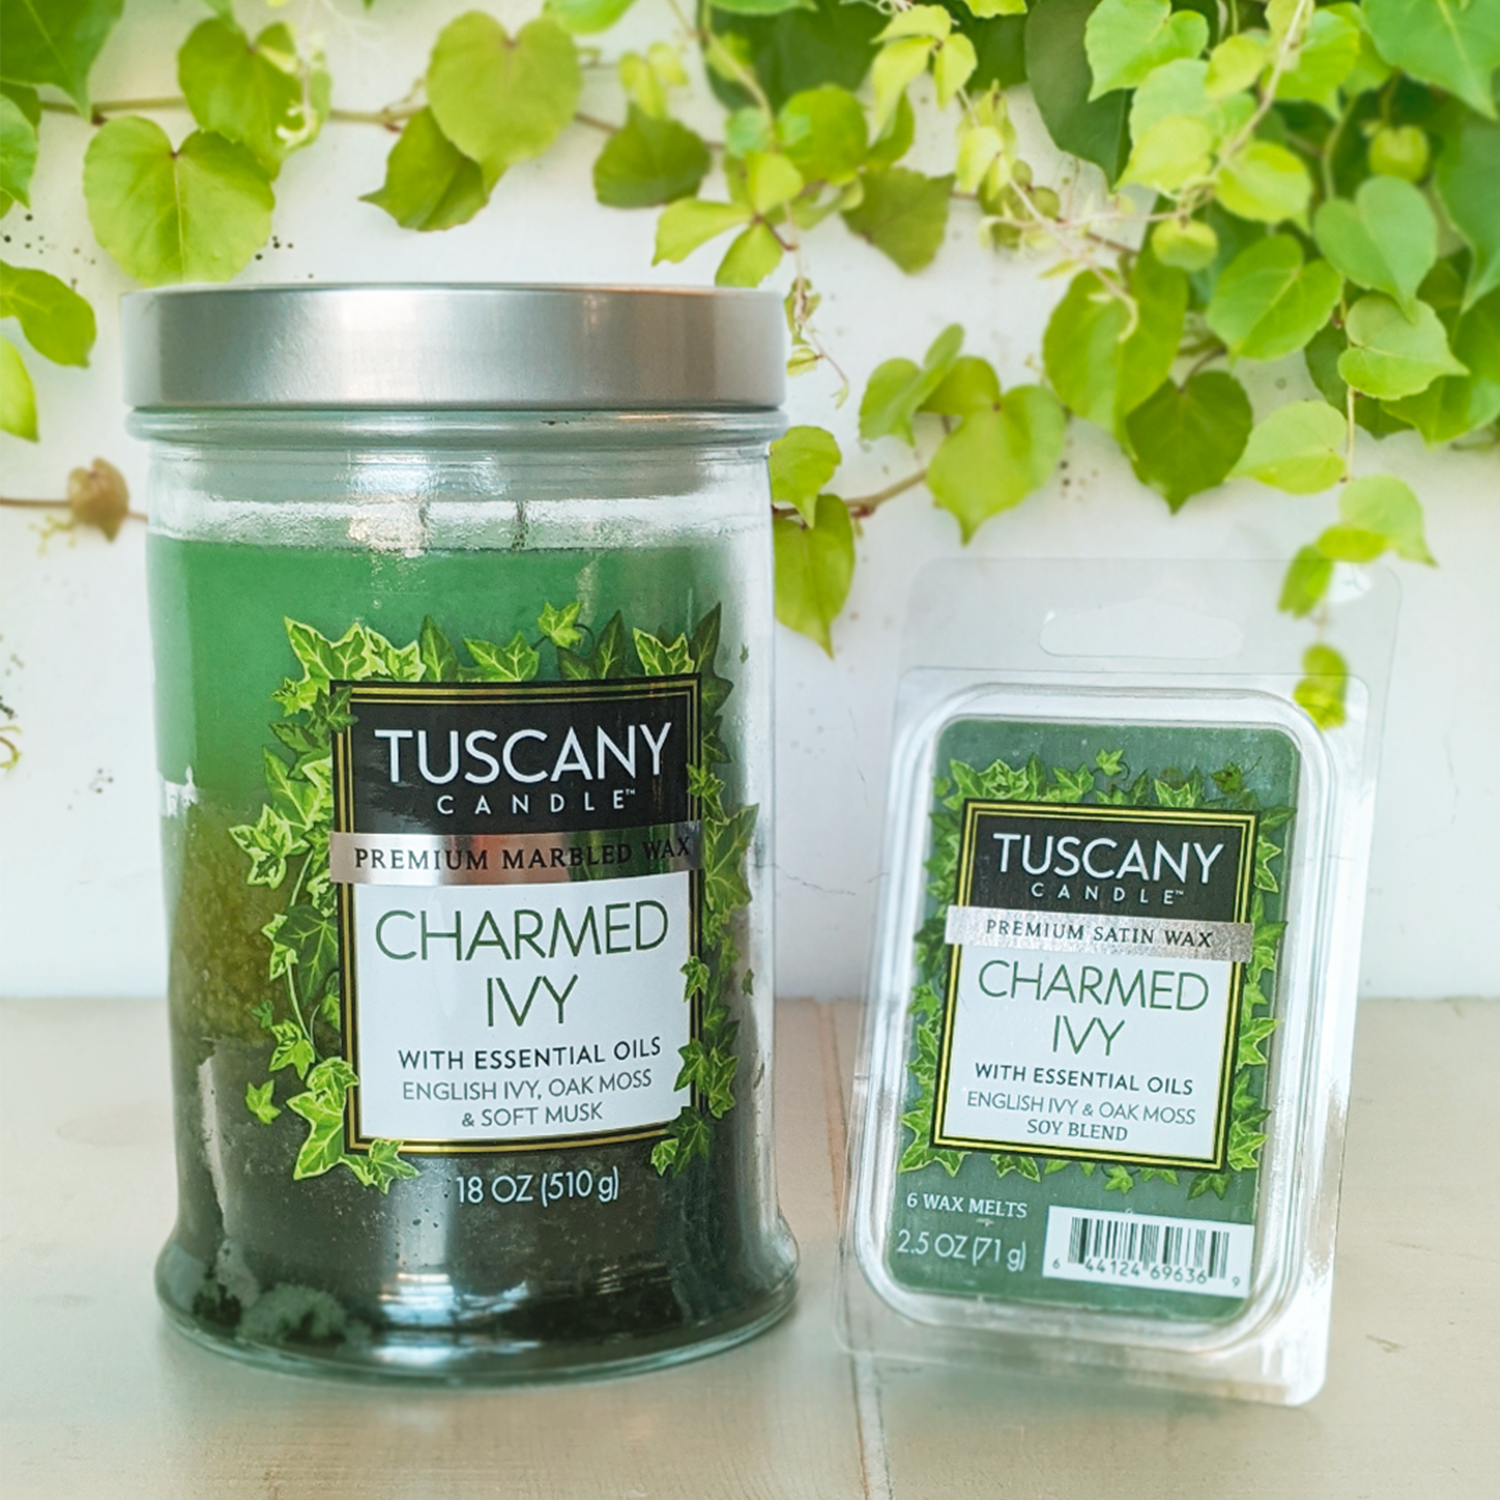 Green "Charmed Ivy Long-Lasting Scented Jar Candle" candle in a jar alongside wax melts with the same fragrance, displayed on a table with trailing English ivy in the background. (Brand Name: Tuscany Candle® EVD)